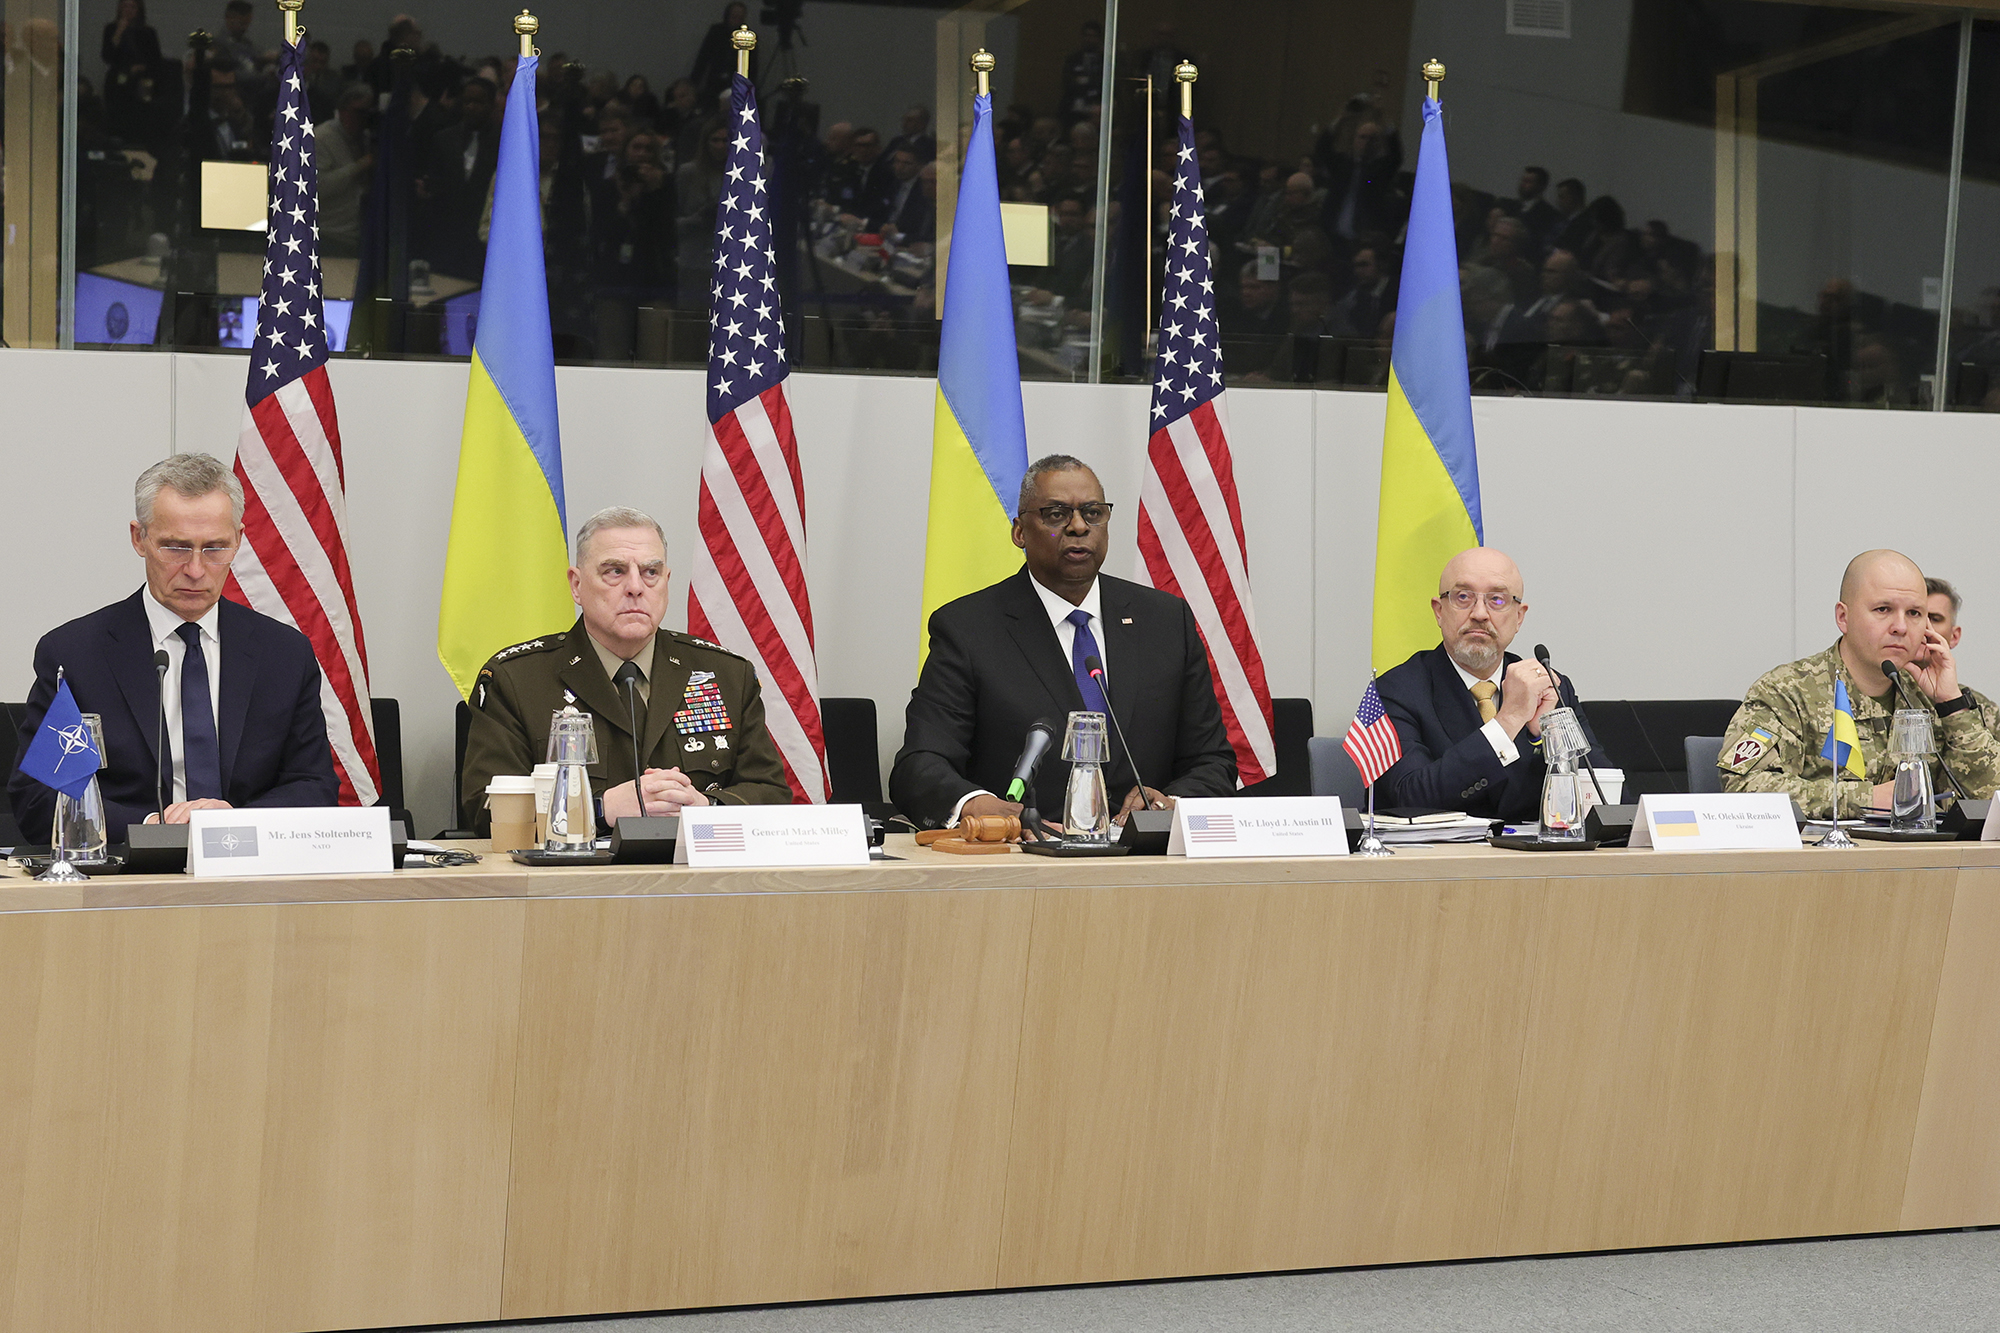 NATO Secretary General Jens Stoltenberg, left, Joint Chiefs of Staff Mark Milley, second left, United States Secretary of Defense Lloyd Austin, center Ukraine's Defense Minister Oleksii Reznikov, second right and Ukraine's Lieutenant General Yevhen Moisiuk, right, are seen during the North Atlantic Council round table meeting of NATO defense ministers at NATO headquarters in Brussels, Belgium, on February 14.